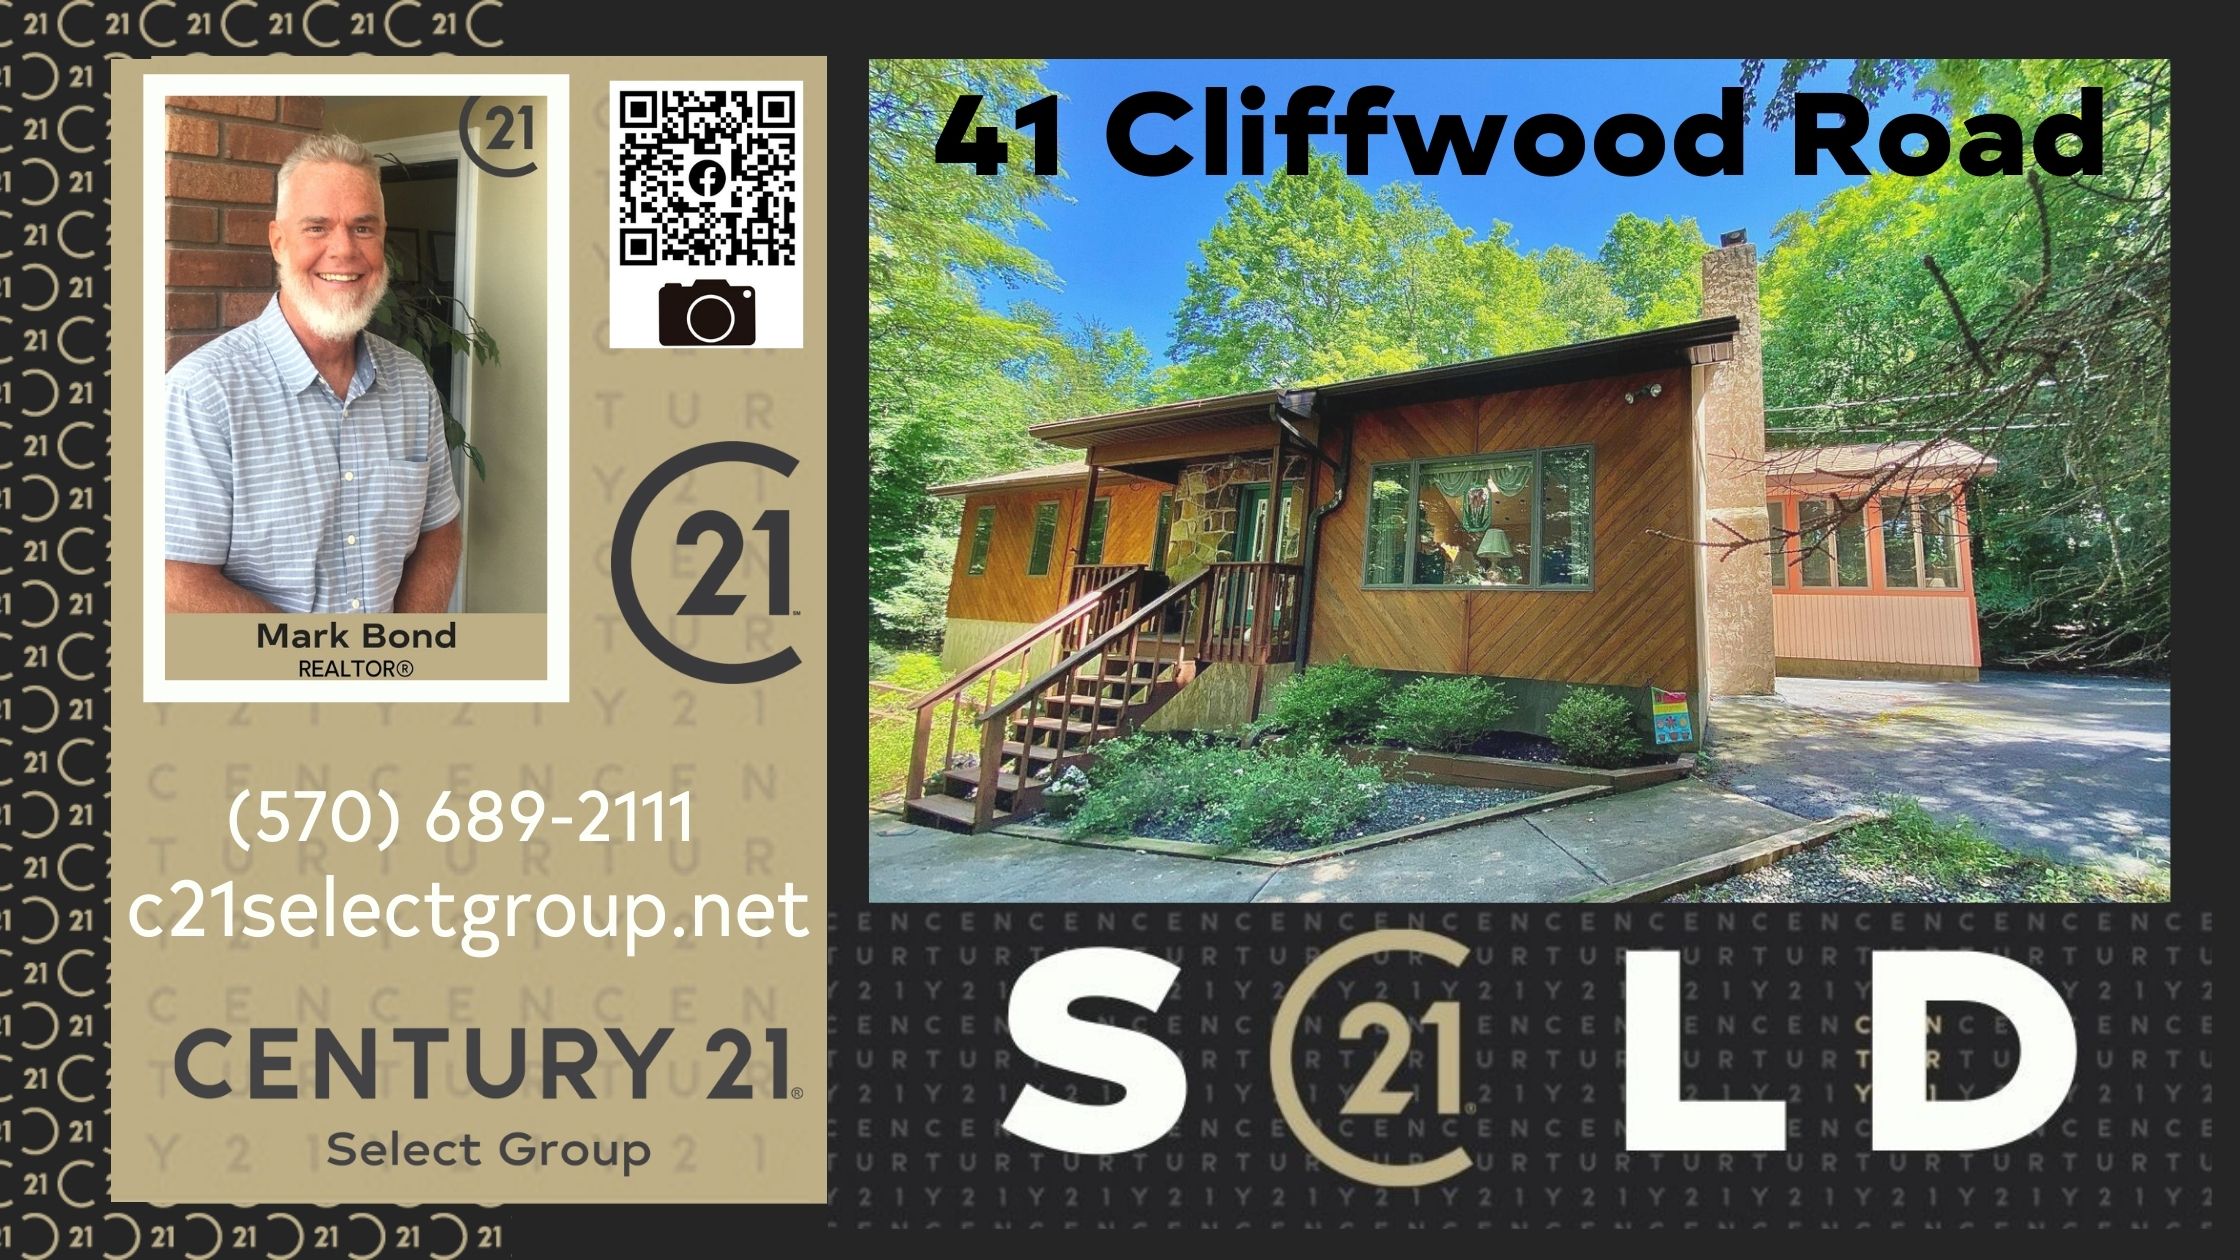 SOLD! 41 Cliffwood Road: The Hideout